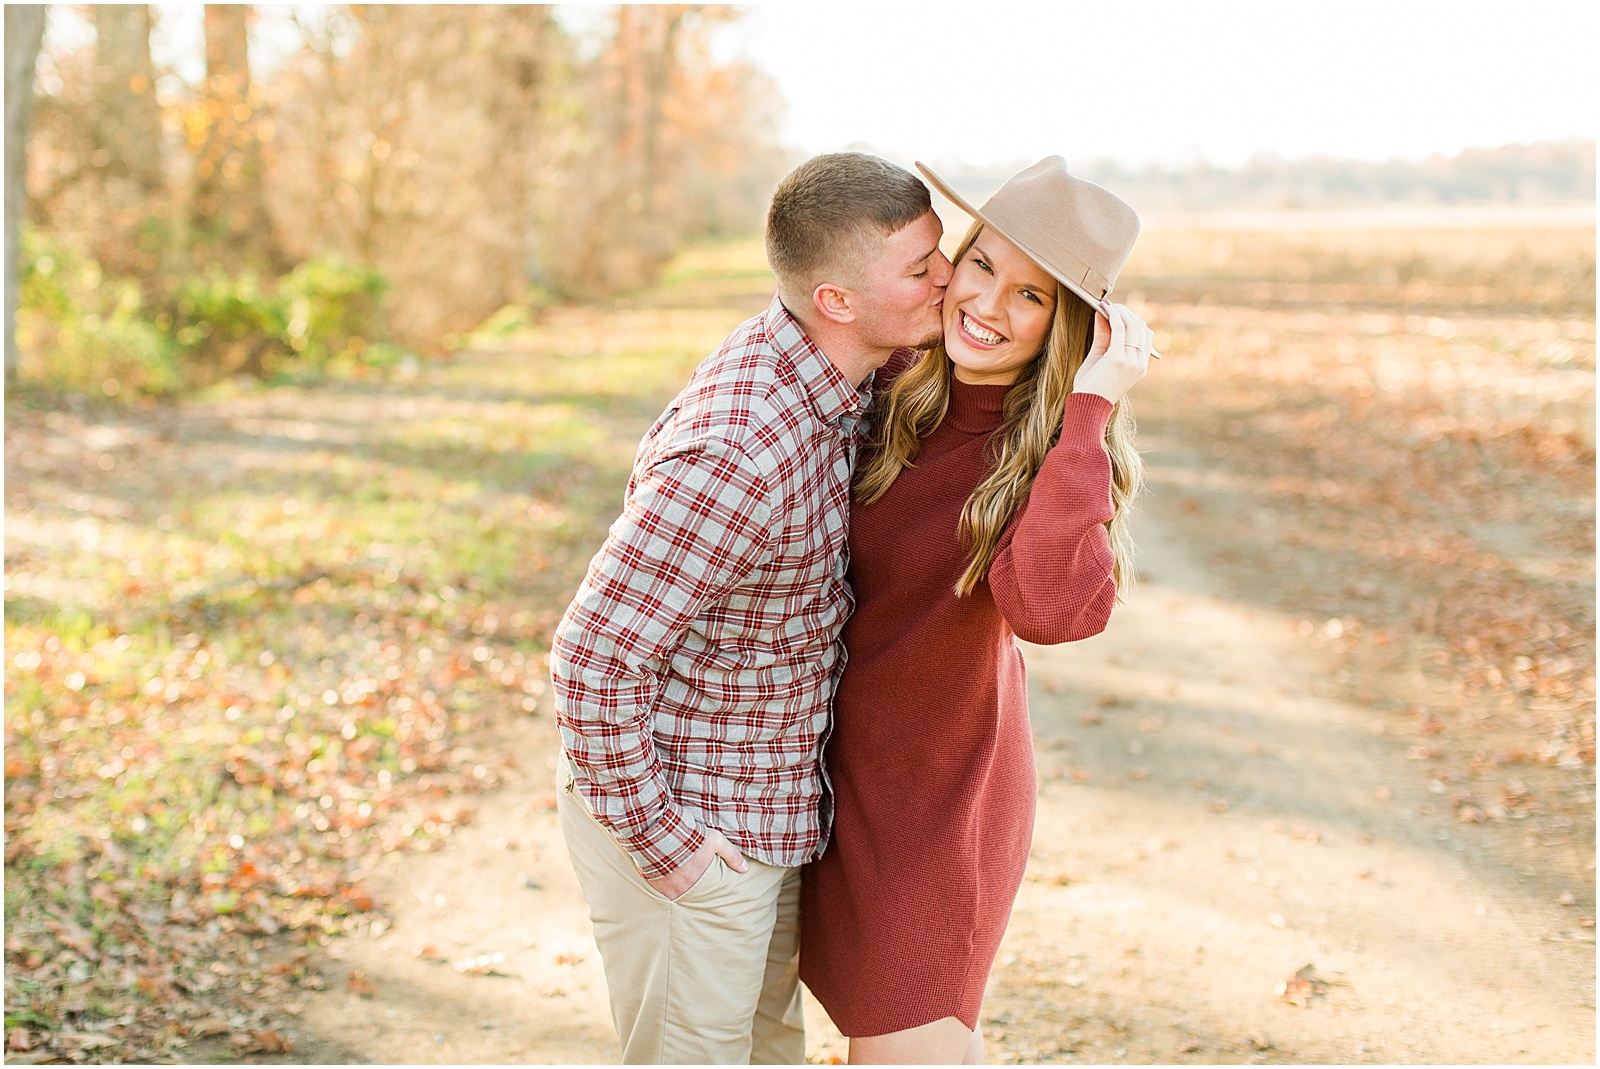 A Fall Southern Indiana Engagement Seesion | Cody and Hannah | Bret and Brandie Photography 014.jpg